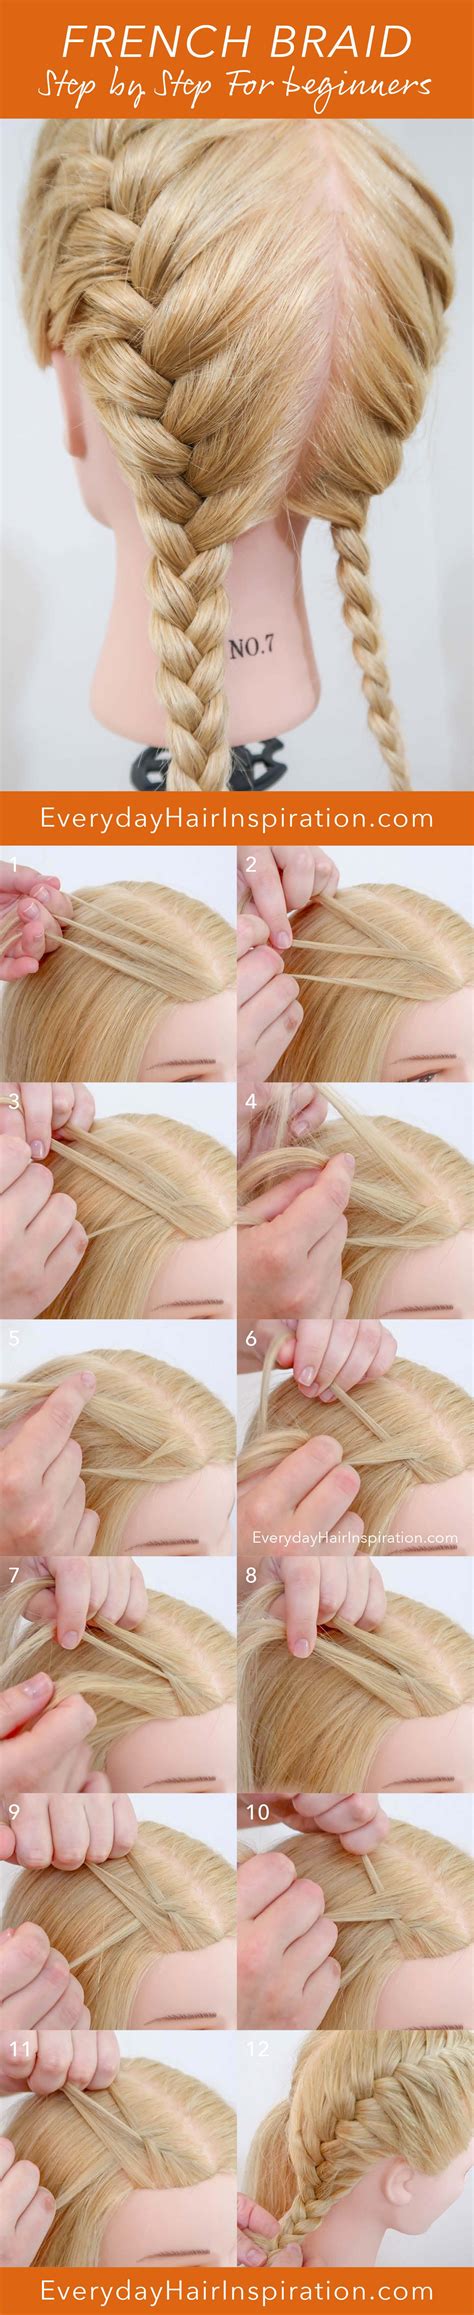 What better way to keep our hair out of our (uh, extremely radiant faces) than with a french braid? French Braid For Beginners - Everyday Hair inspiration - FRENCH BRAIDS